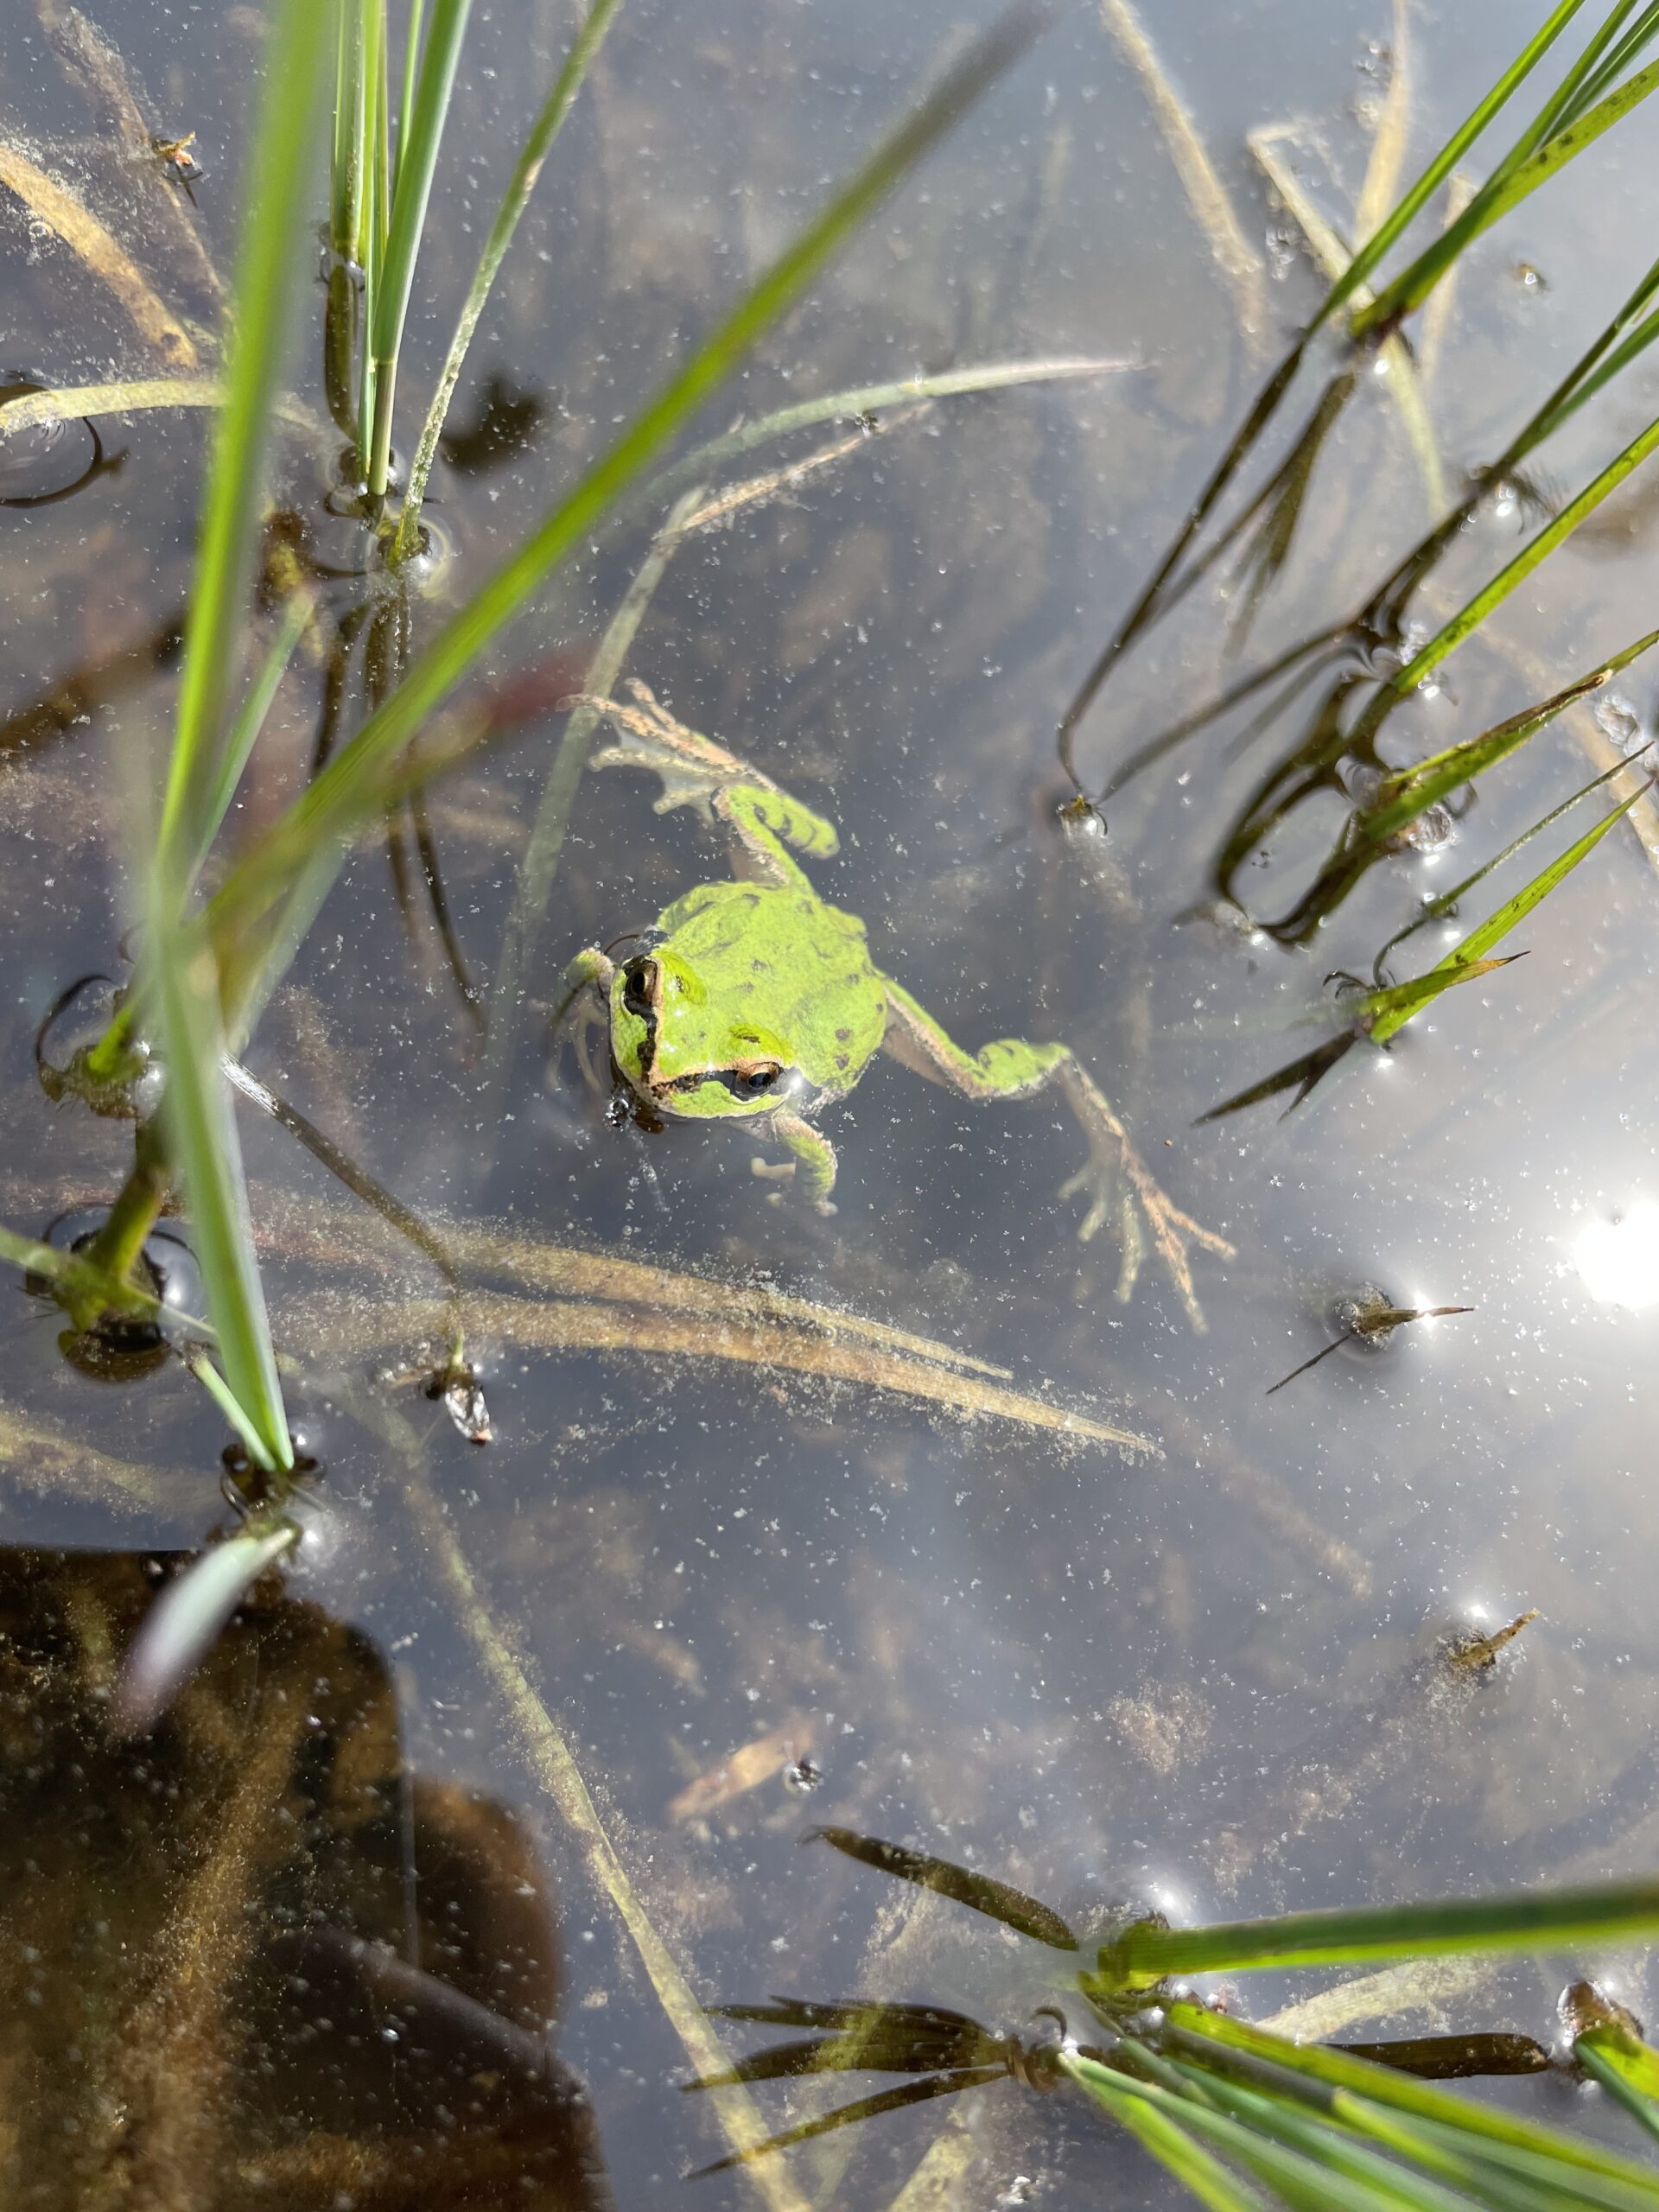 Image of frog in a pond